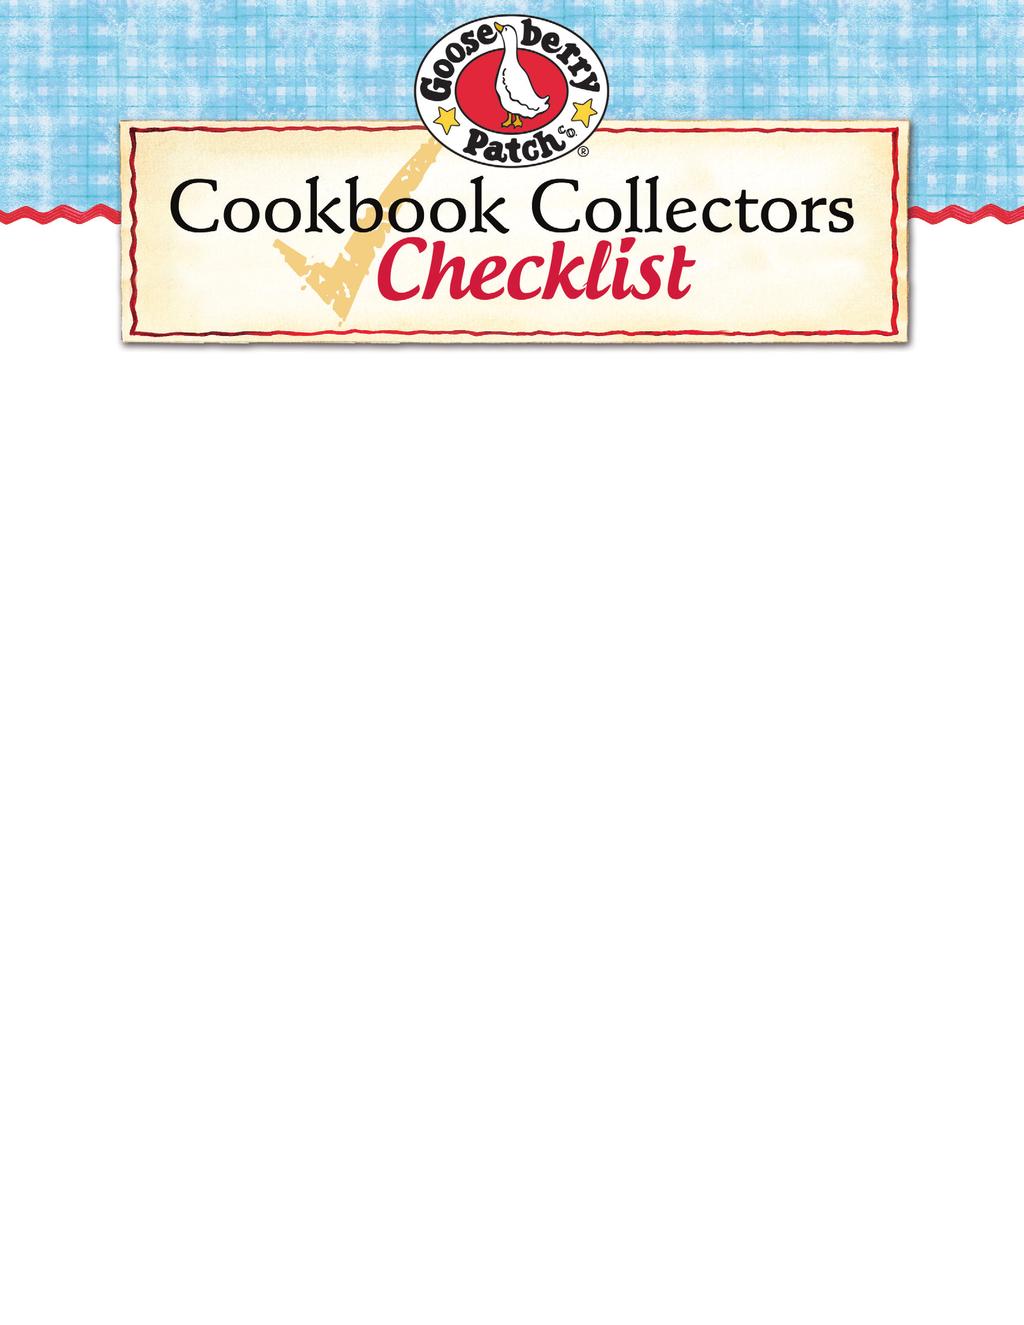 Comb-bound Cookbooks: Over 200 budget-friendly recipes & tips in a convenient lay-flat design. M863 5 Ingredients or Less!